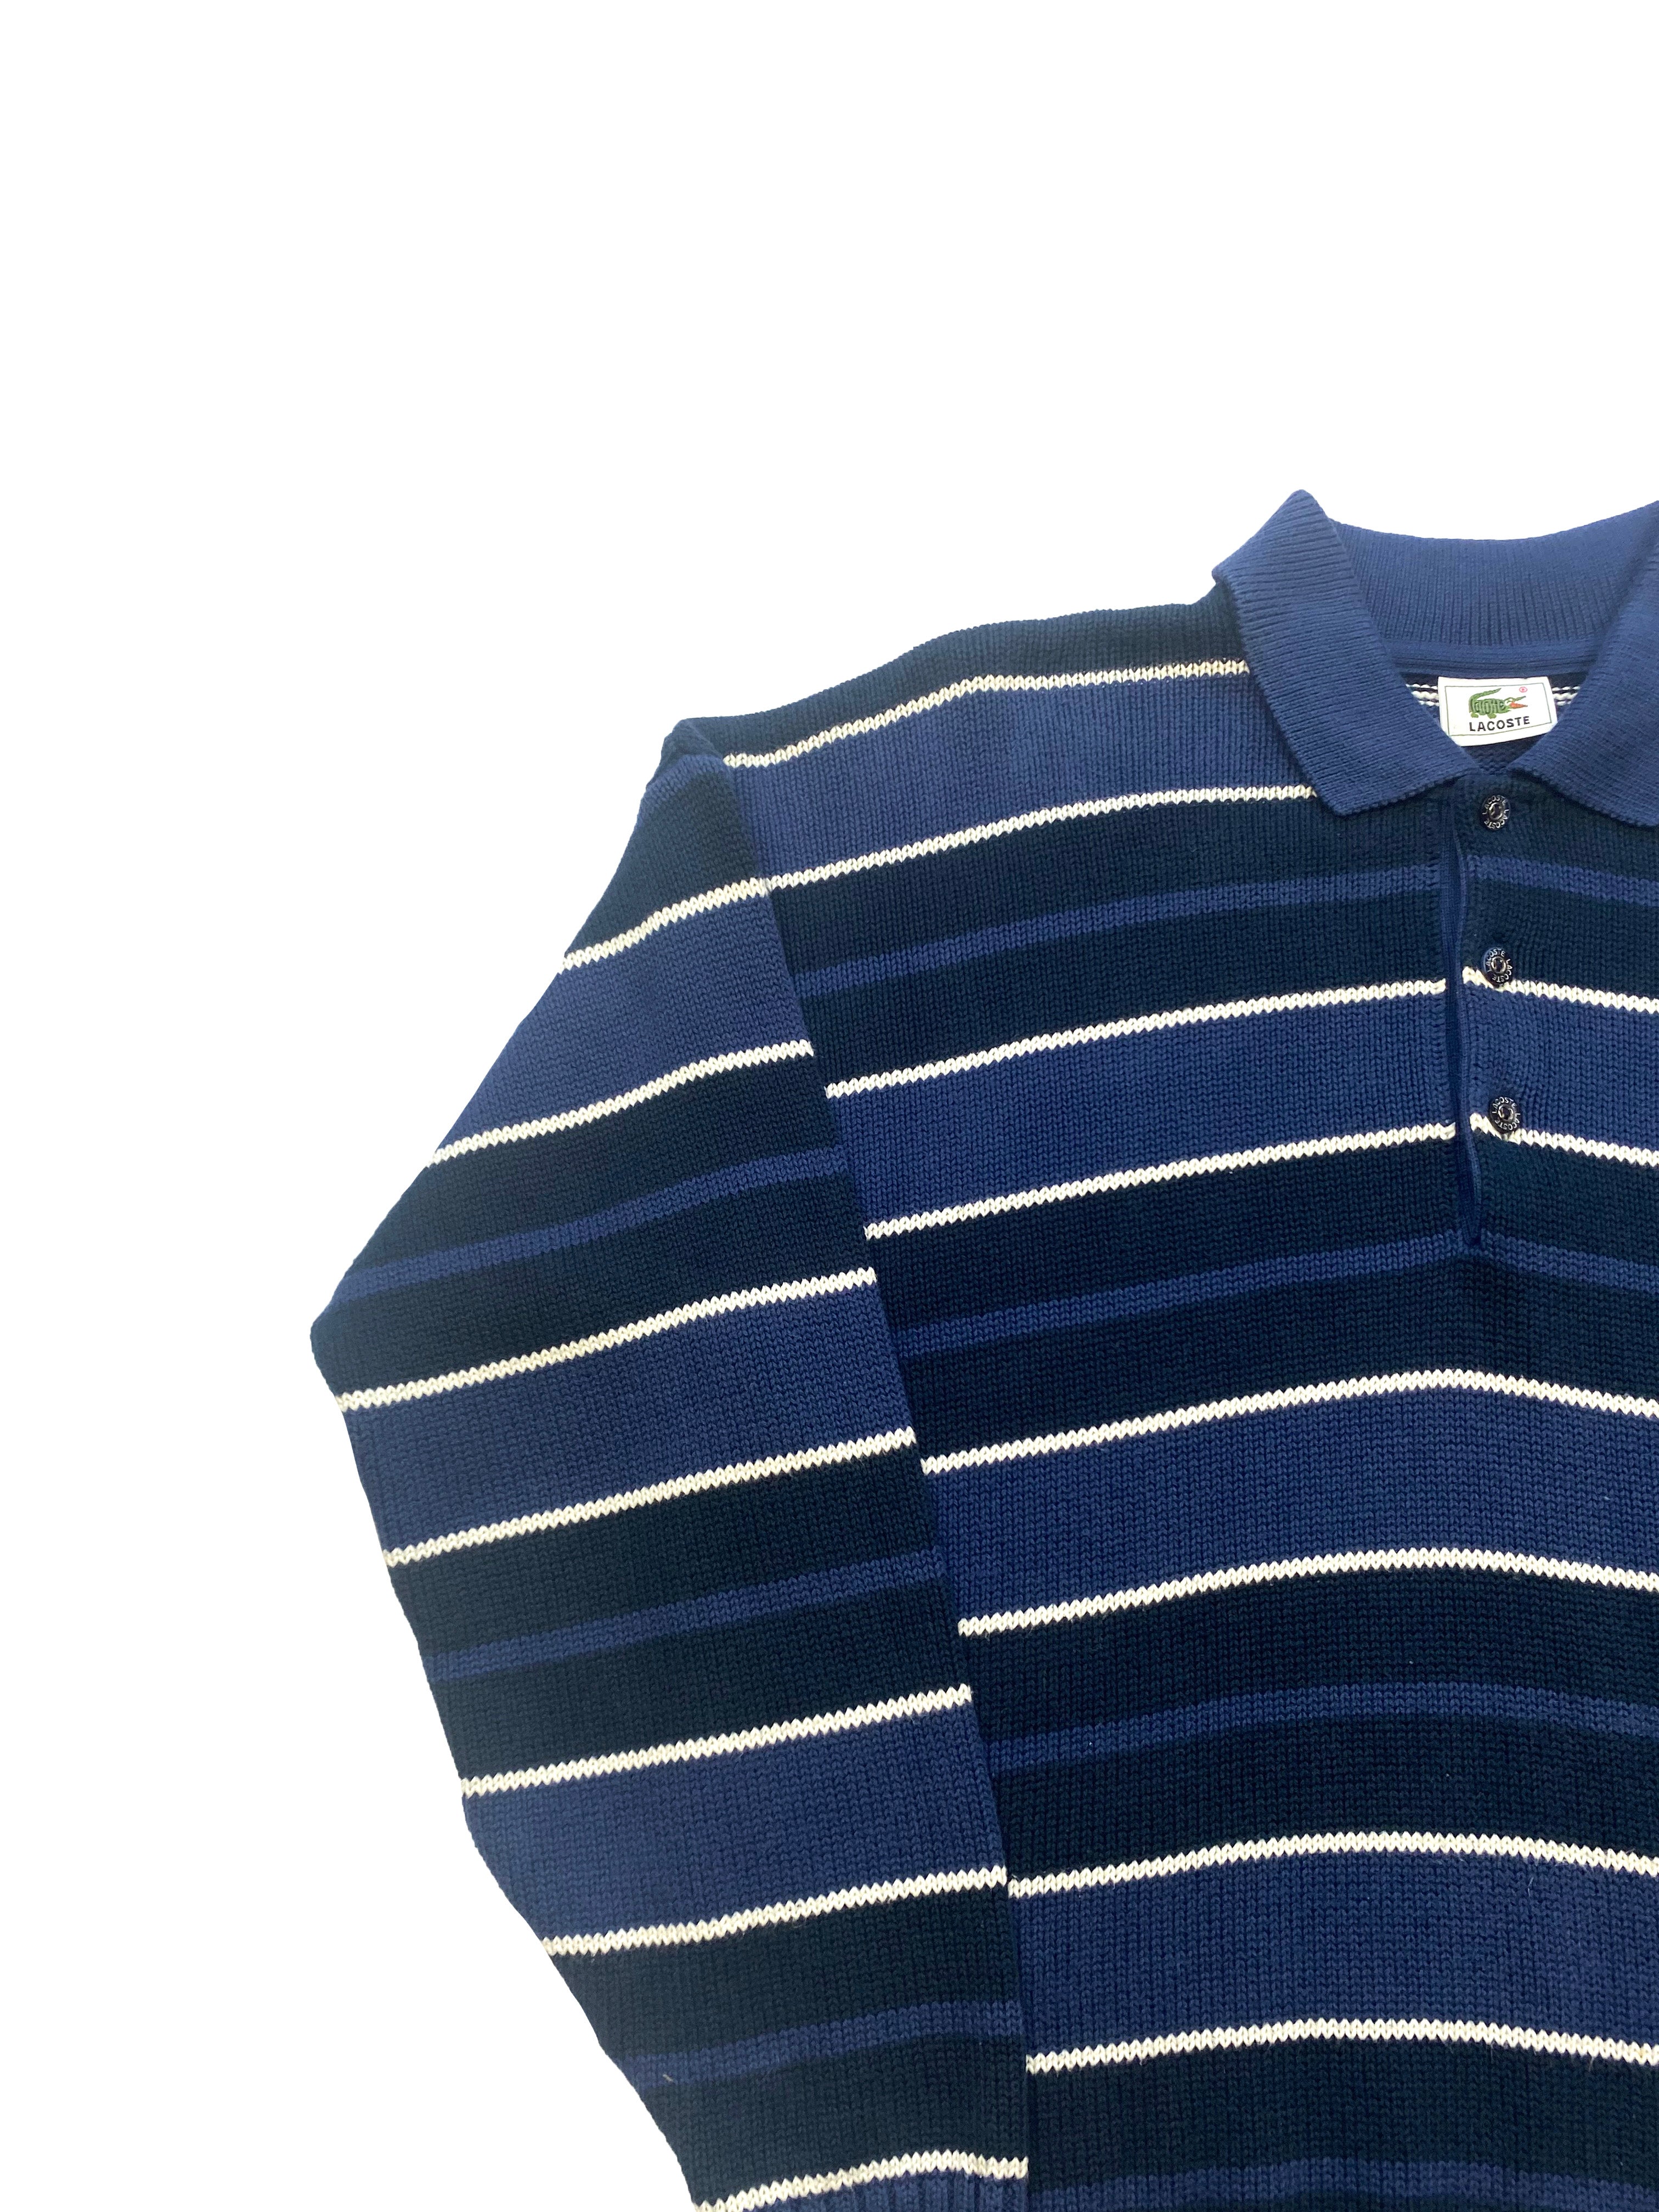 Lacoste Navy Polo Knit Jumper 90's